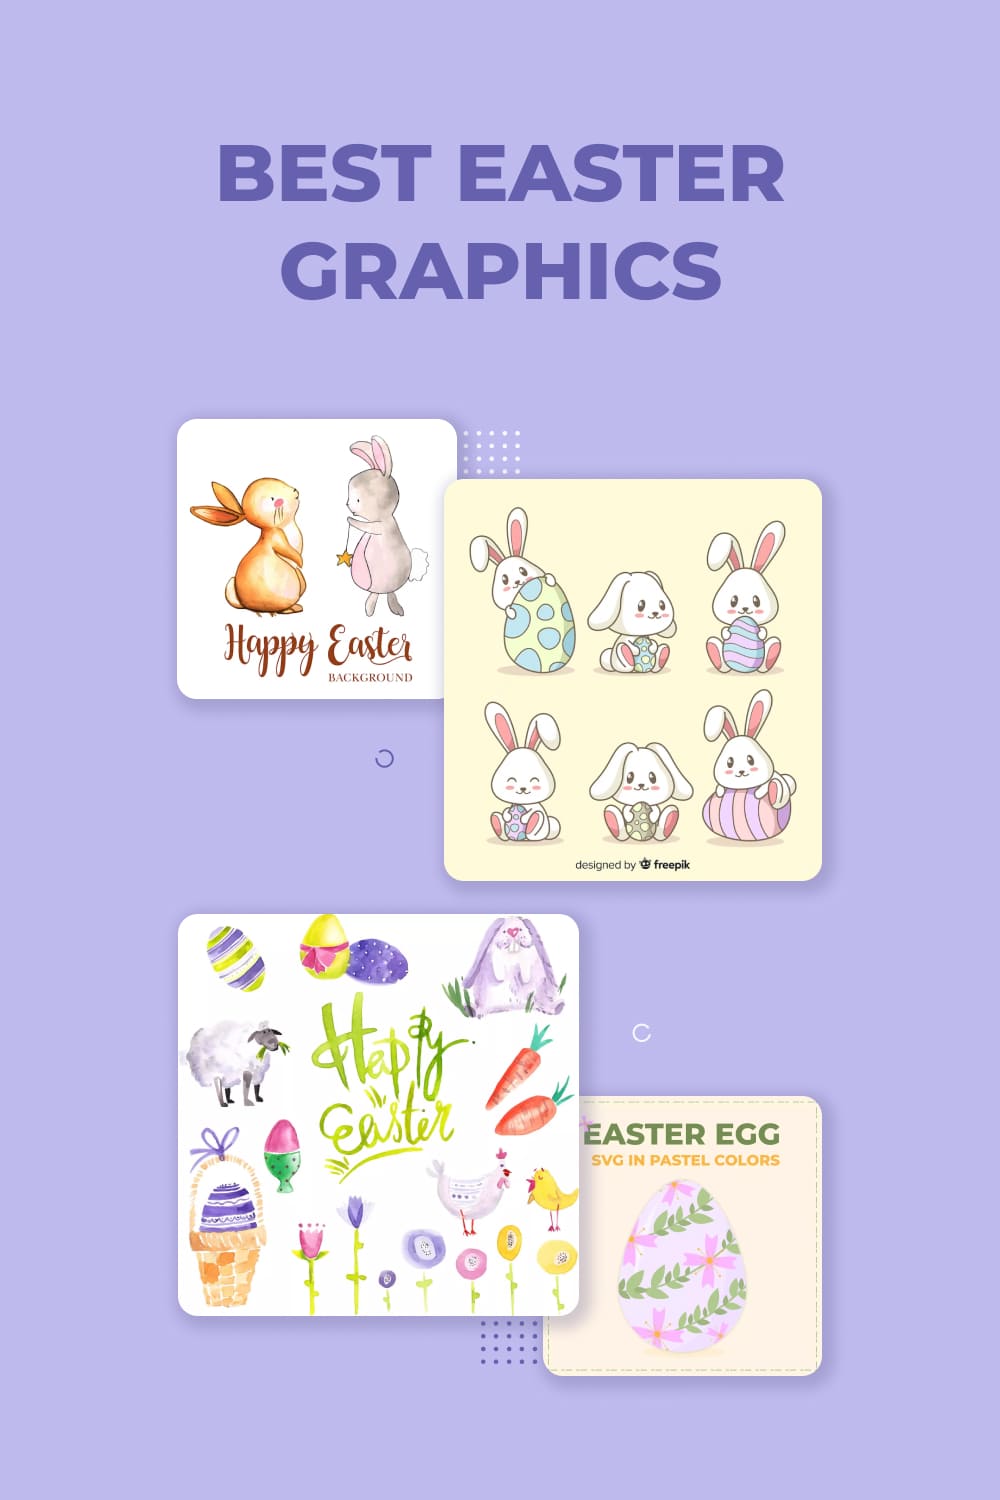 Set of easter cards with the words best easter graphics.